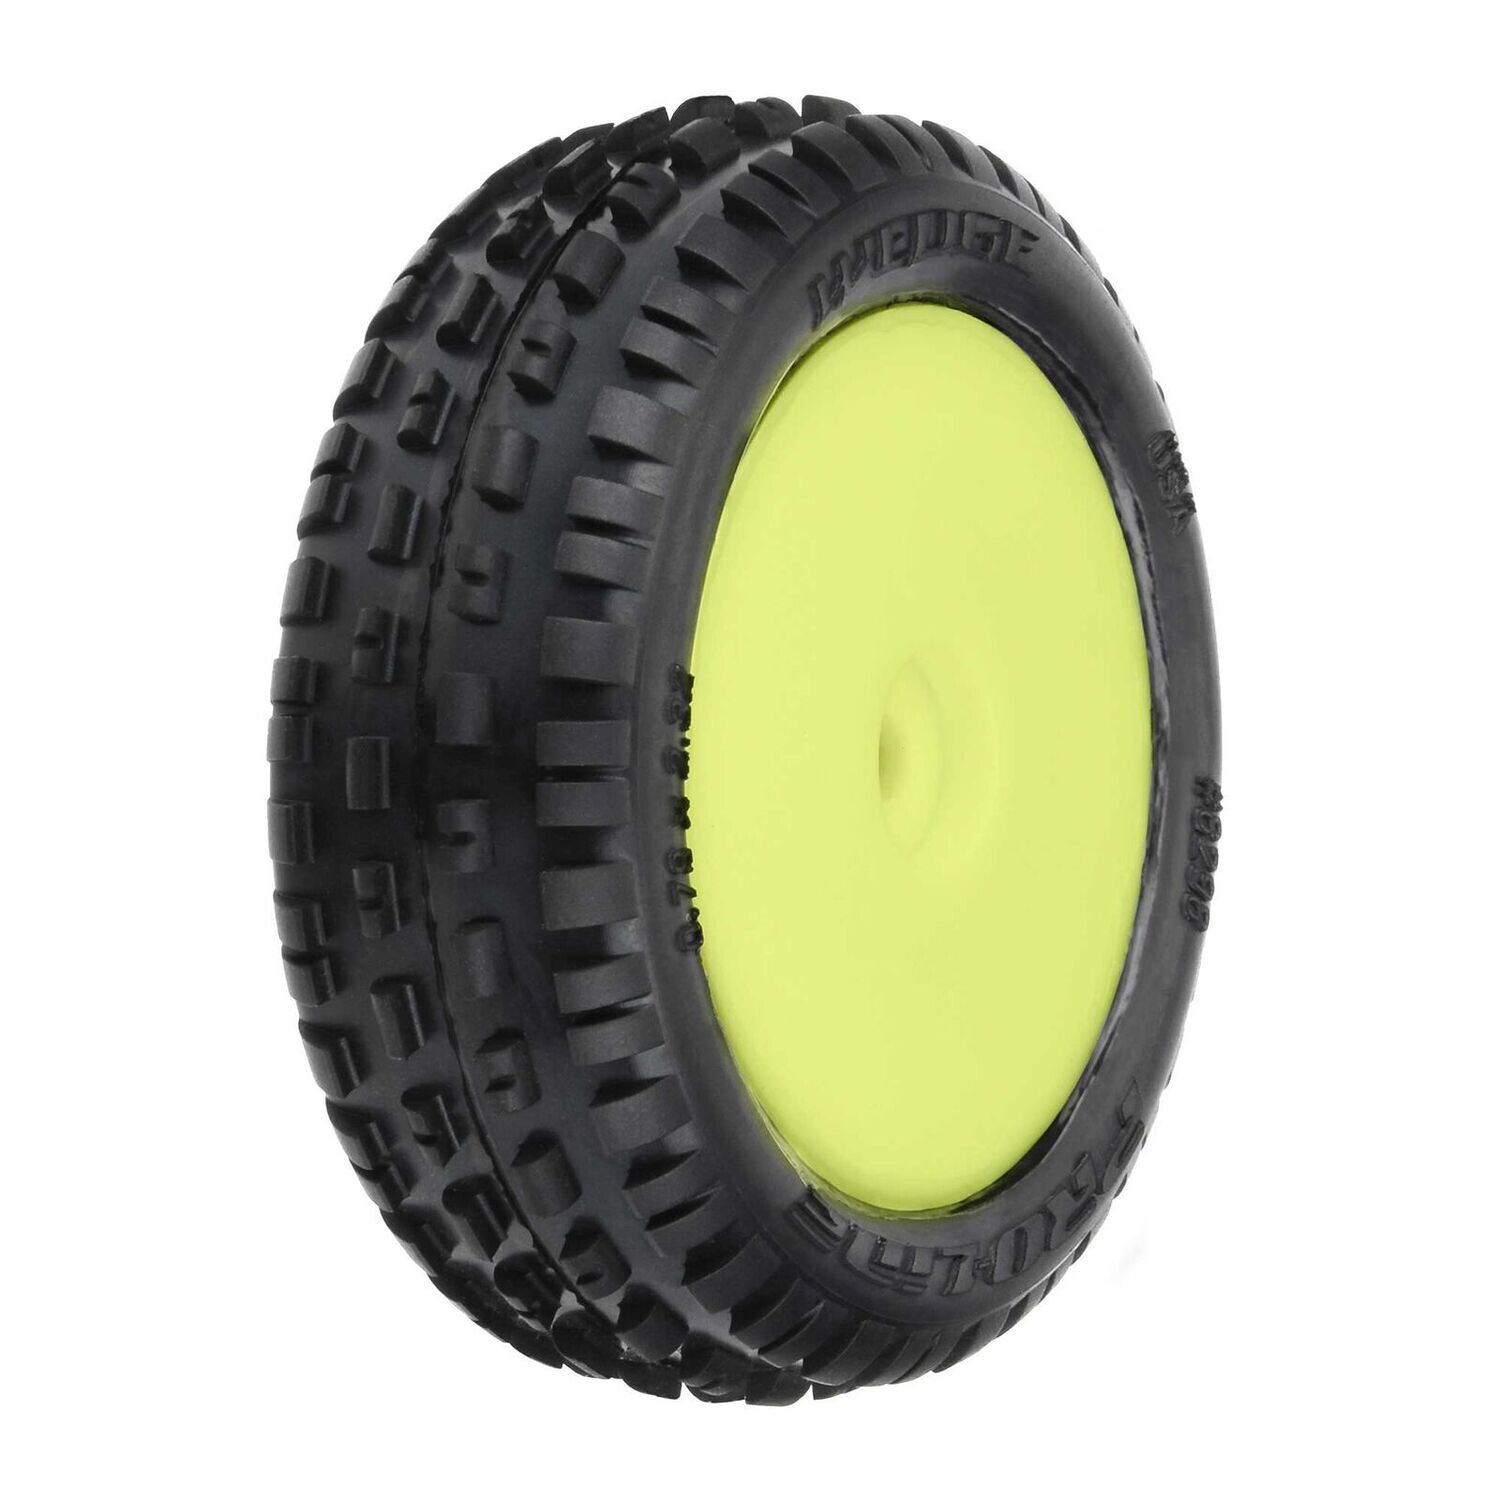 Pro-line Mini-B Front Wedge Carpet Tires (Mounted), Yellow